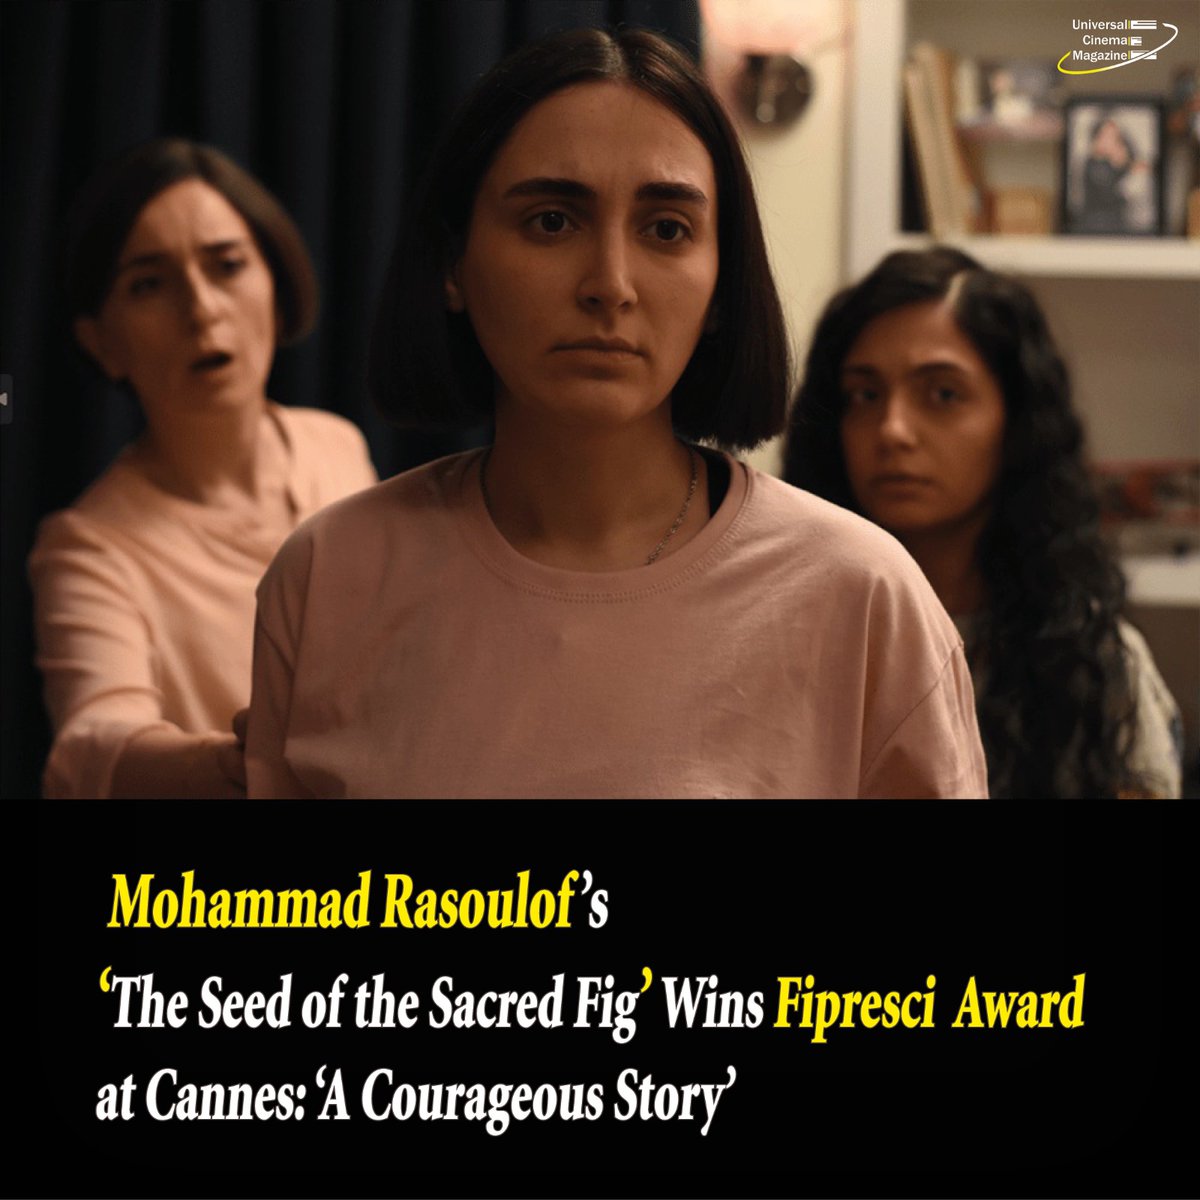 Mohammad Rasoulof’s “The Seed of the Sacred Fig” won the Fipresci award at Cannes. More in bio. Source:variety #iranıanartist #iranianactress #iranianfilmmaker #mohammadrasoulof #soheilagolestani #theseedofthesacredfig #cannes2024 #cannesfilmfestival #cinema